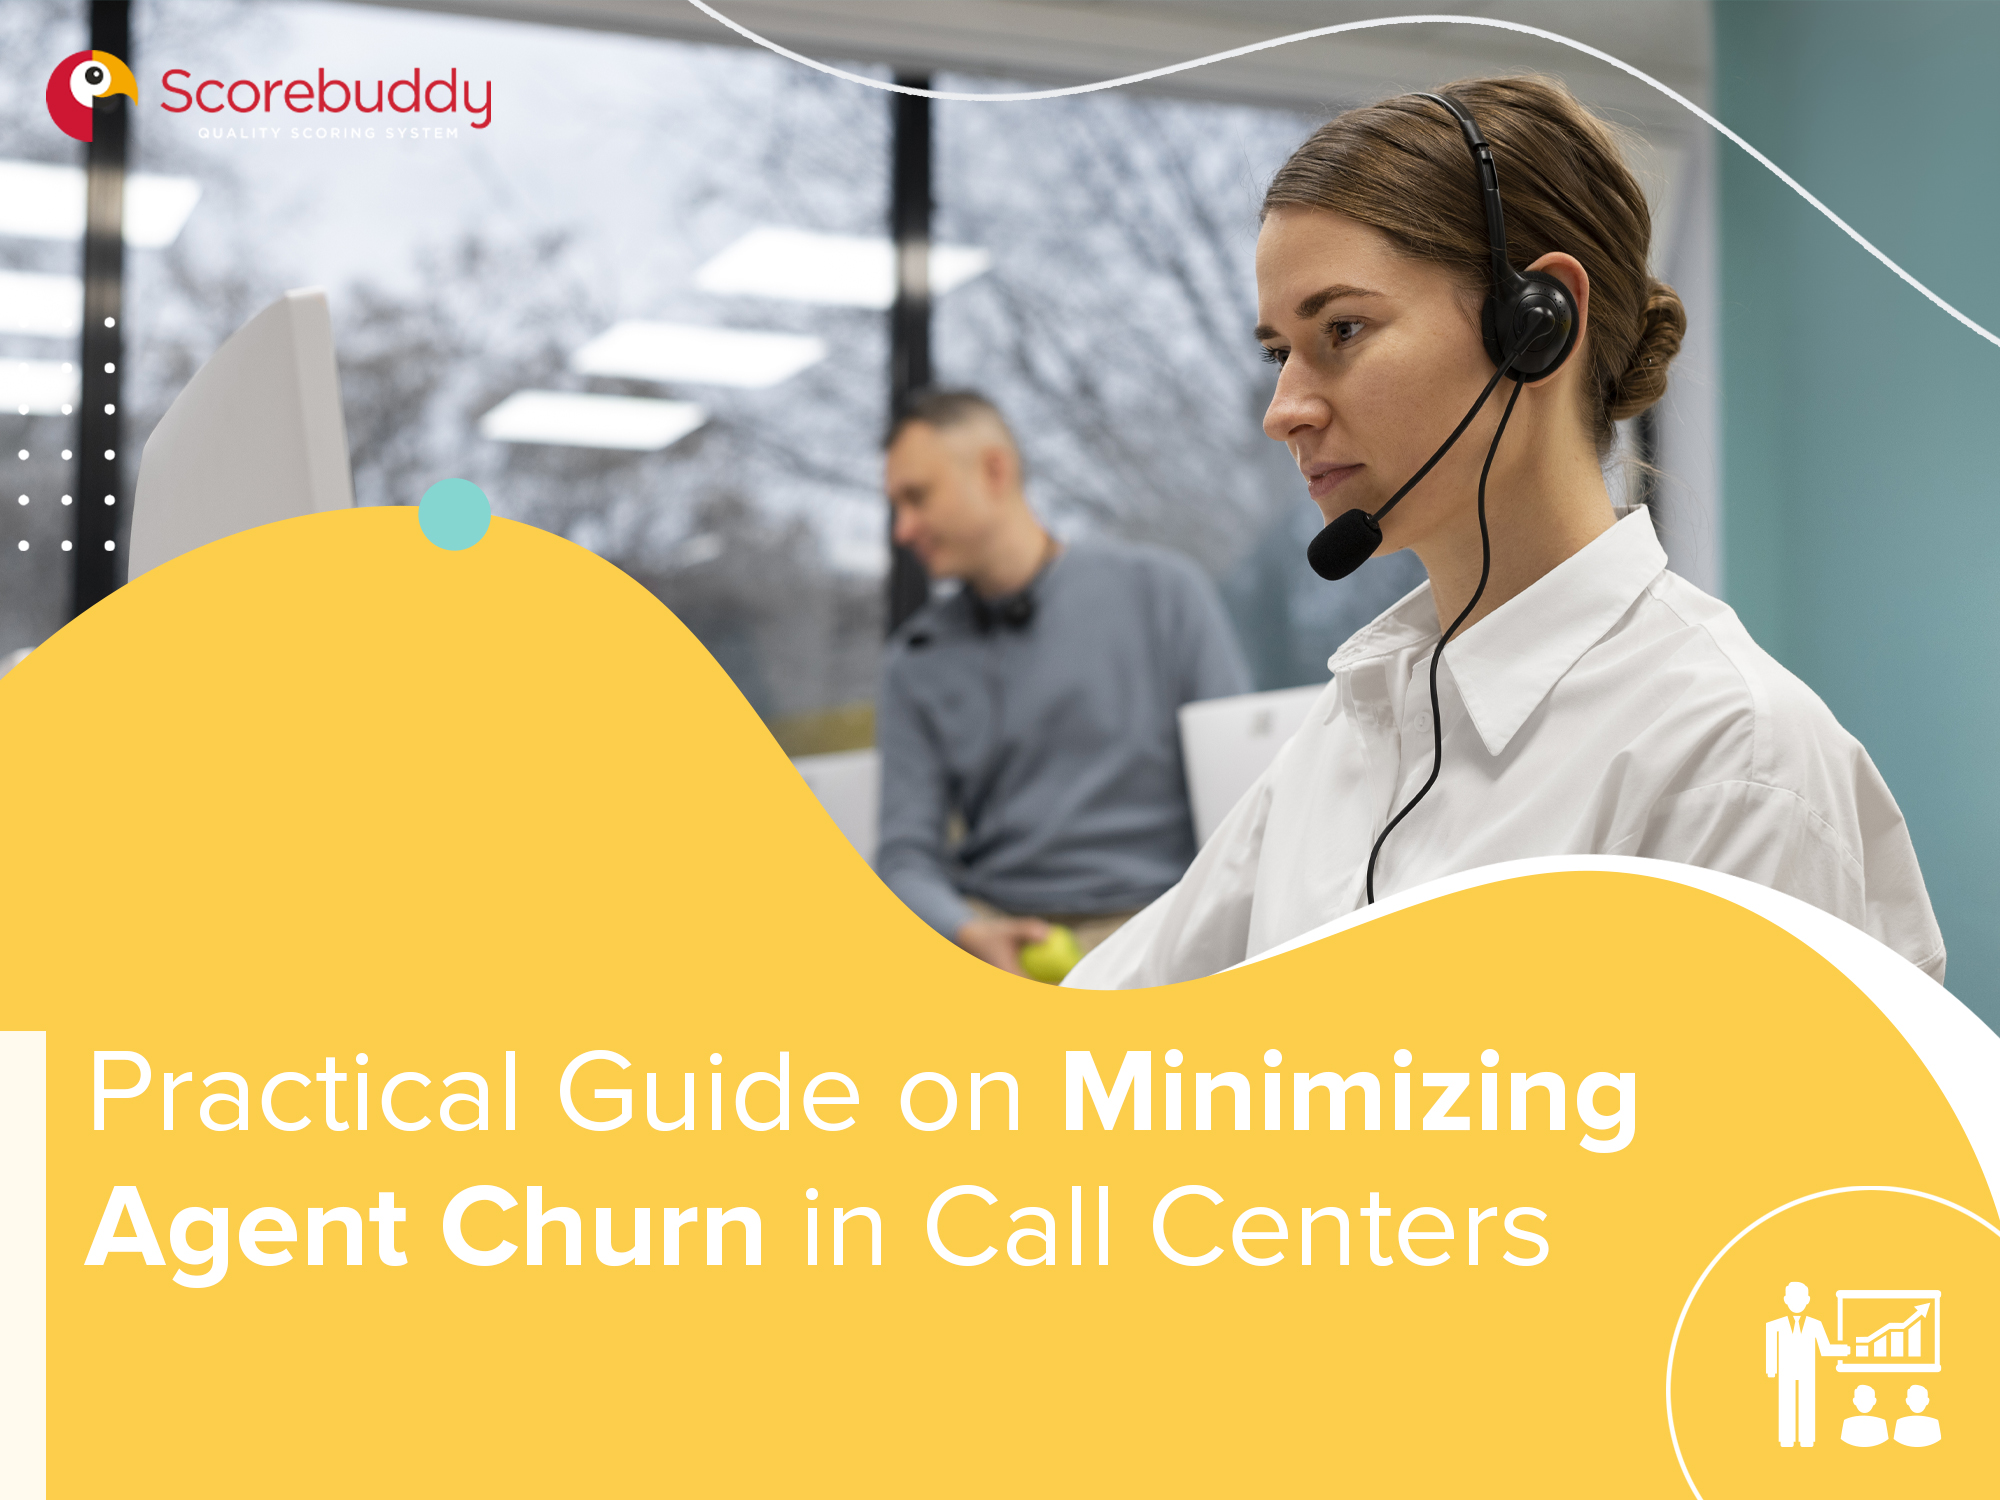 Practical Guide on Minimizing Agent Churn in Call Centers